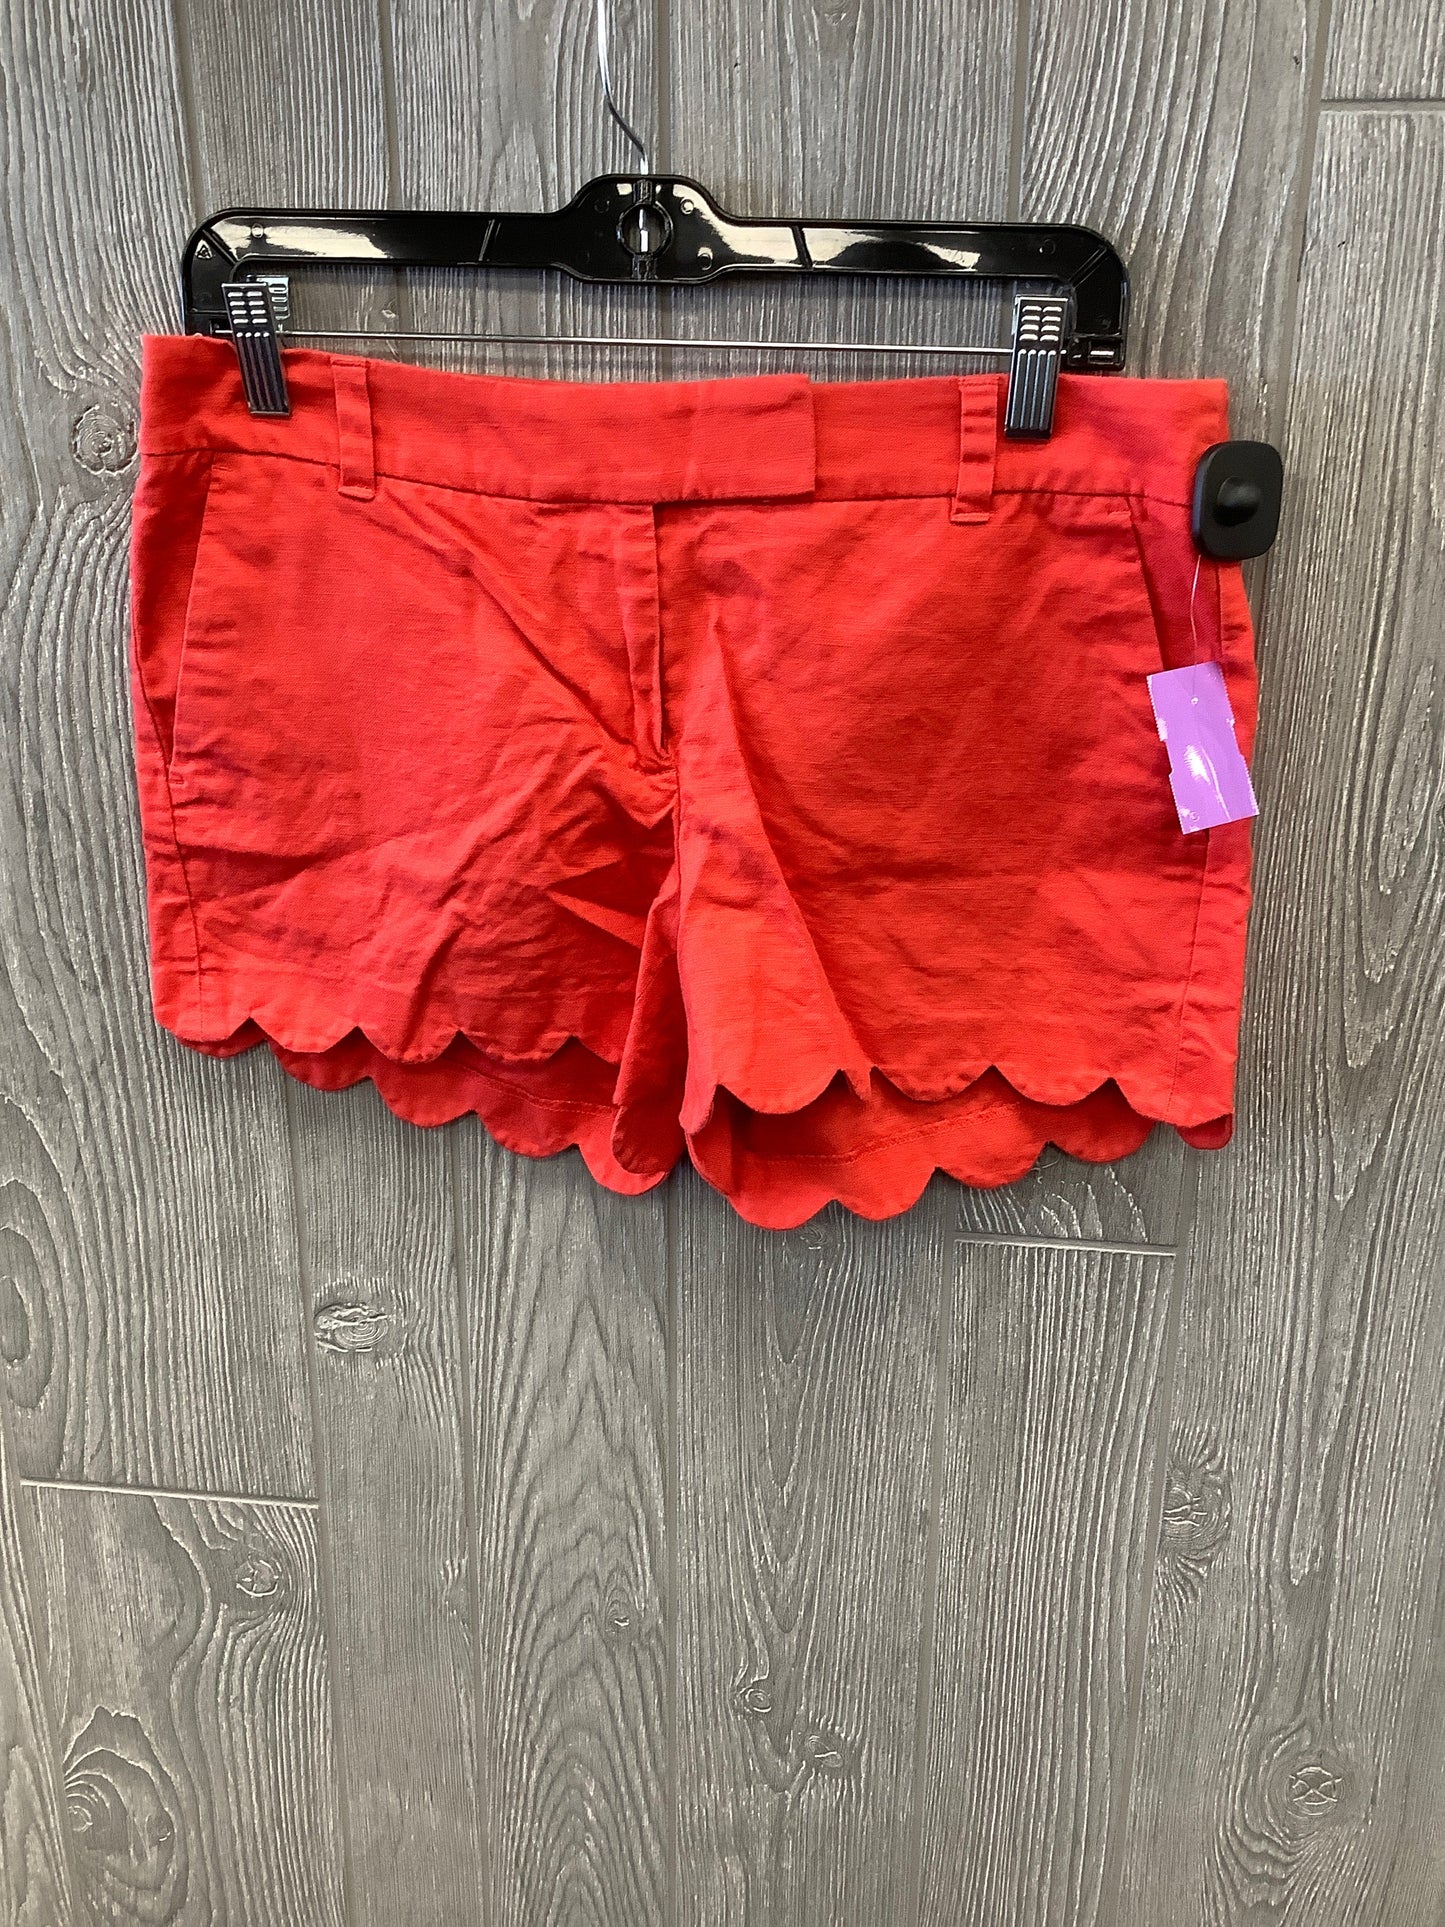 Shorts By J Crew  Size: 6